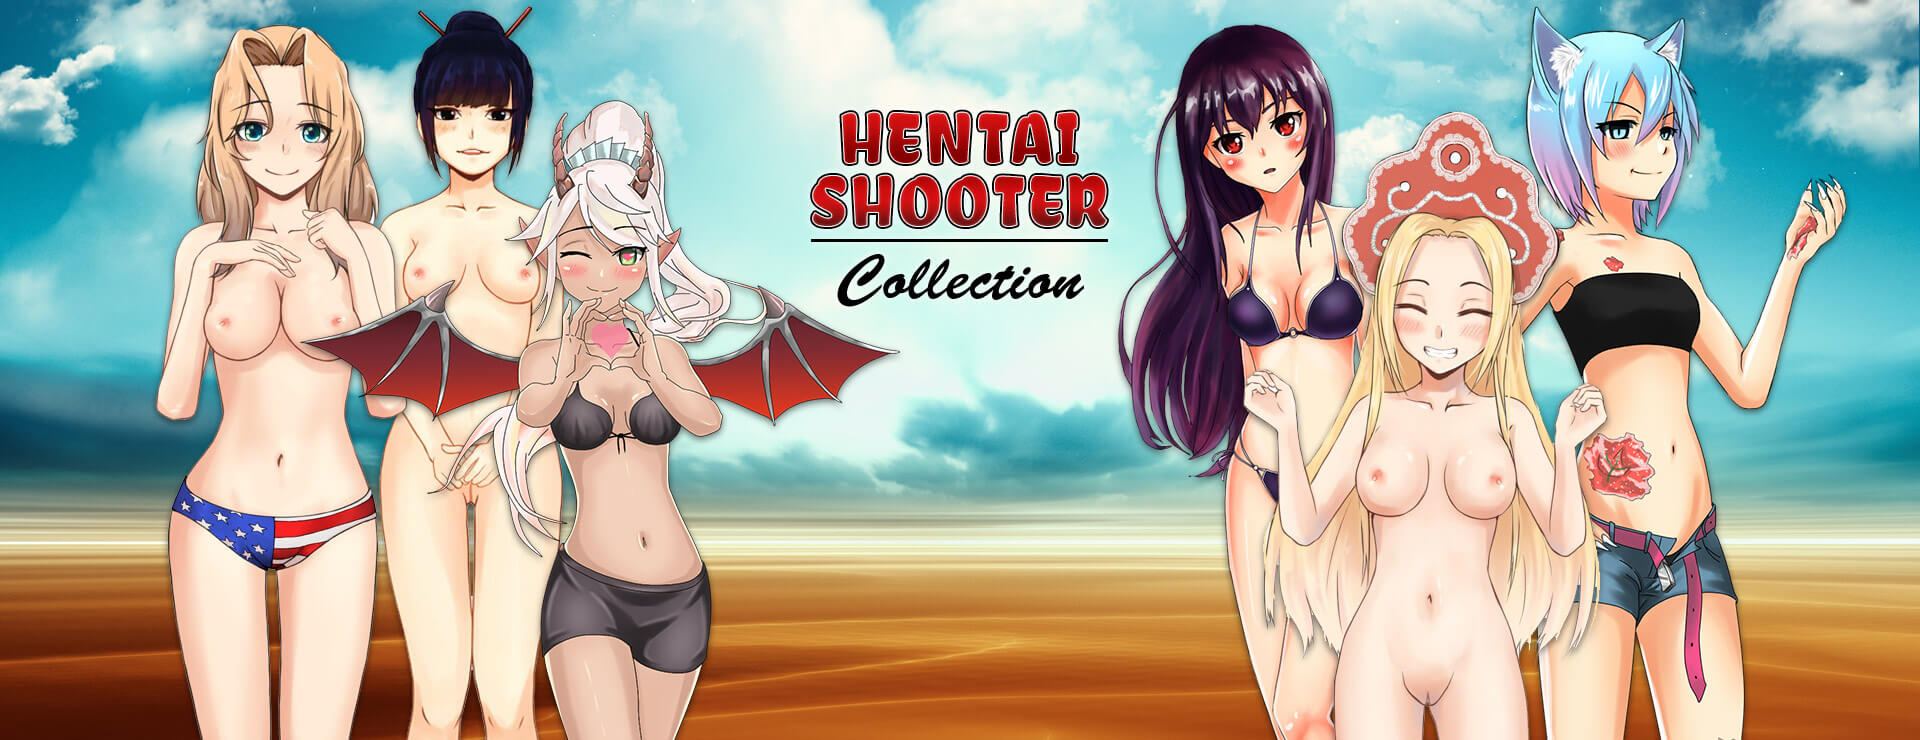 Hentai Shooter 3D - Complete Collection - Łatwe Gra